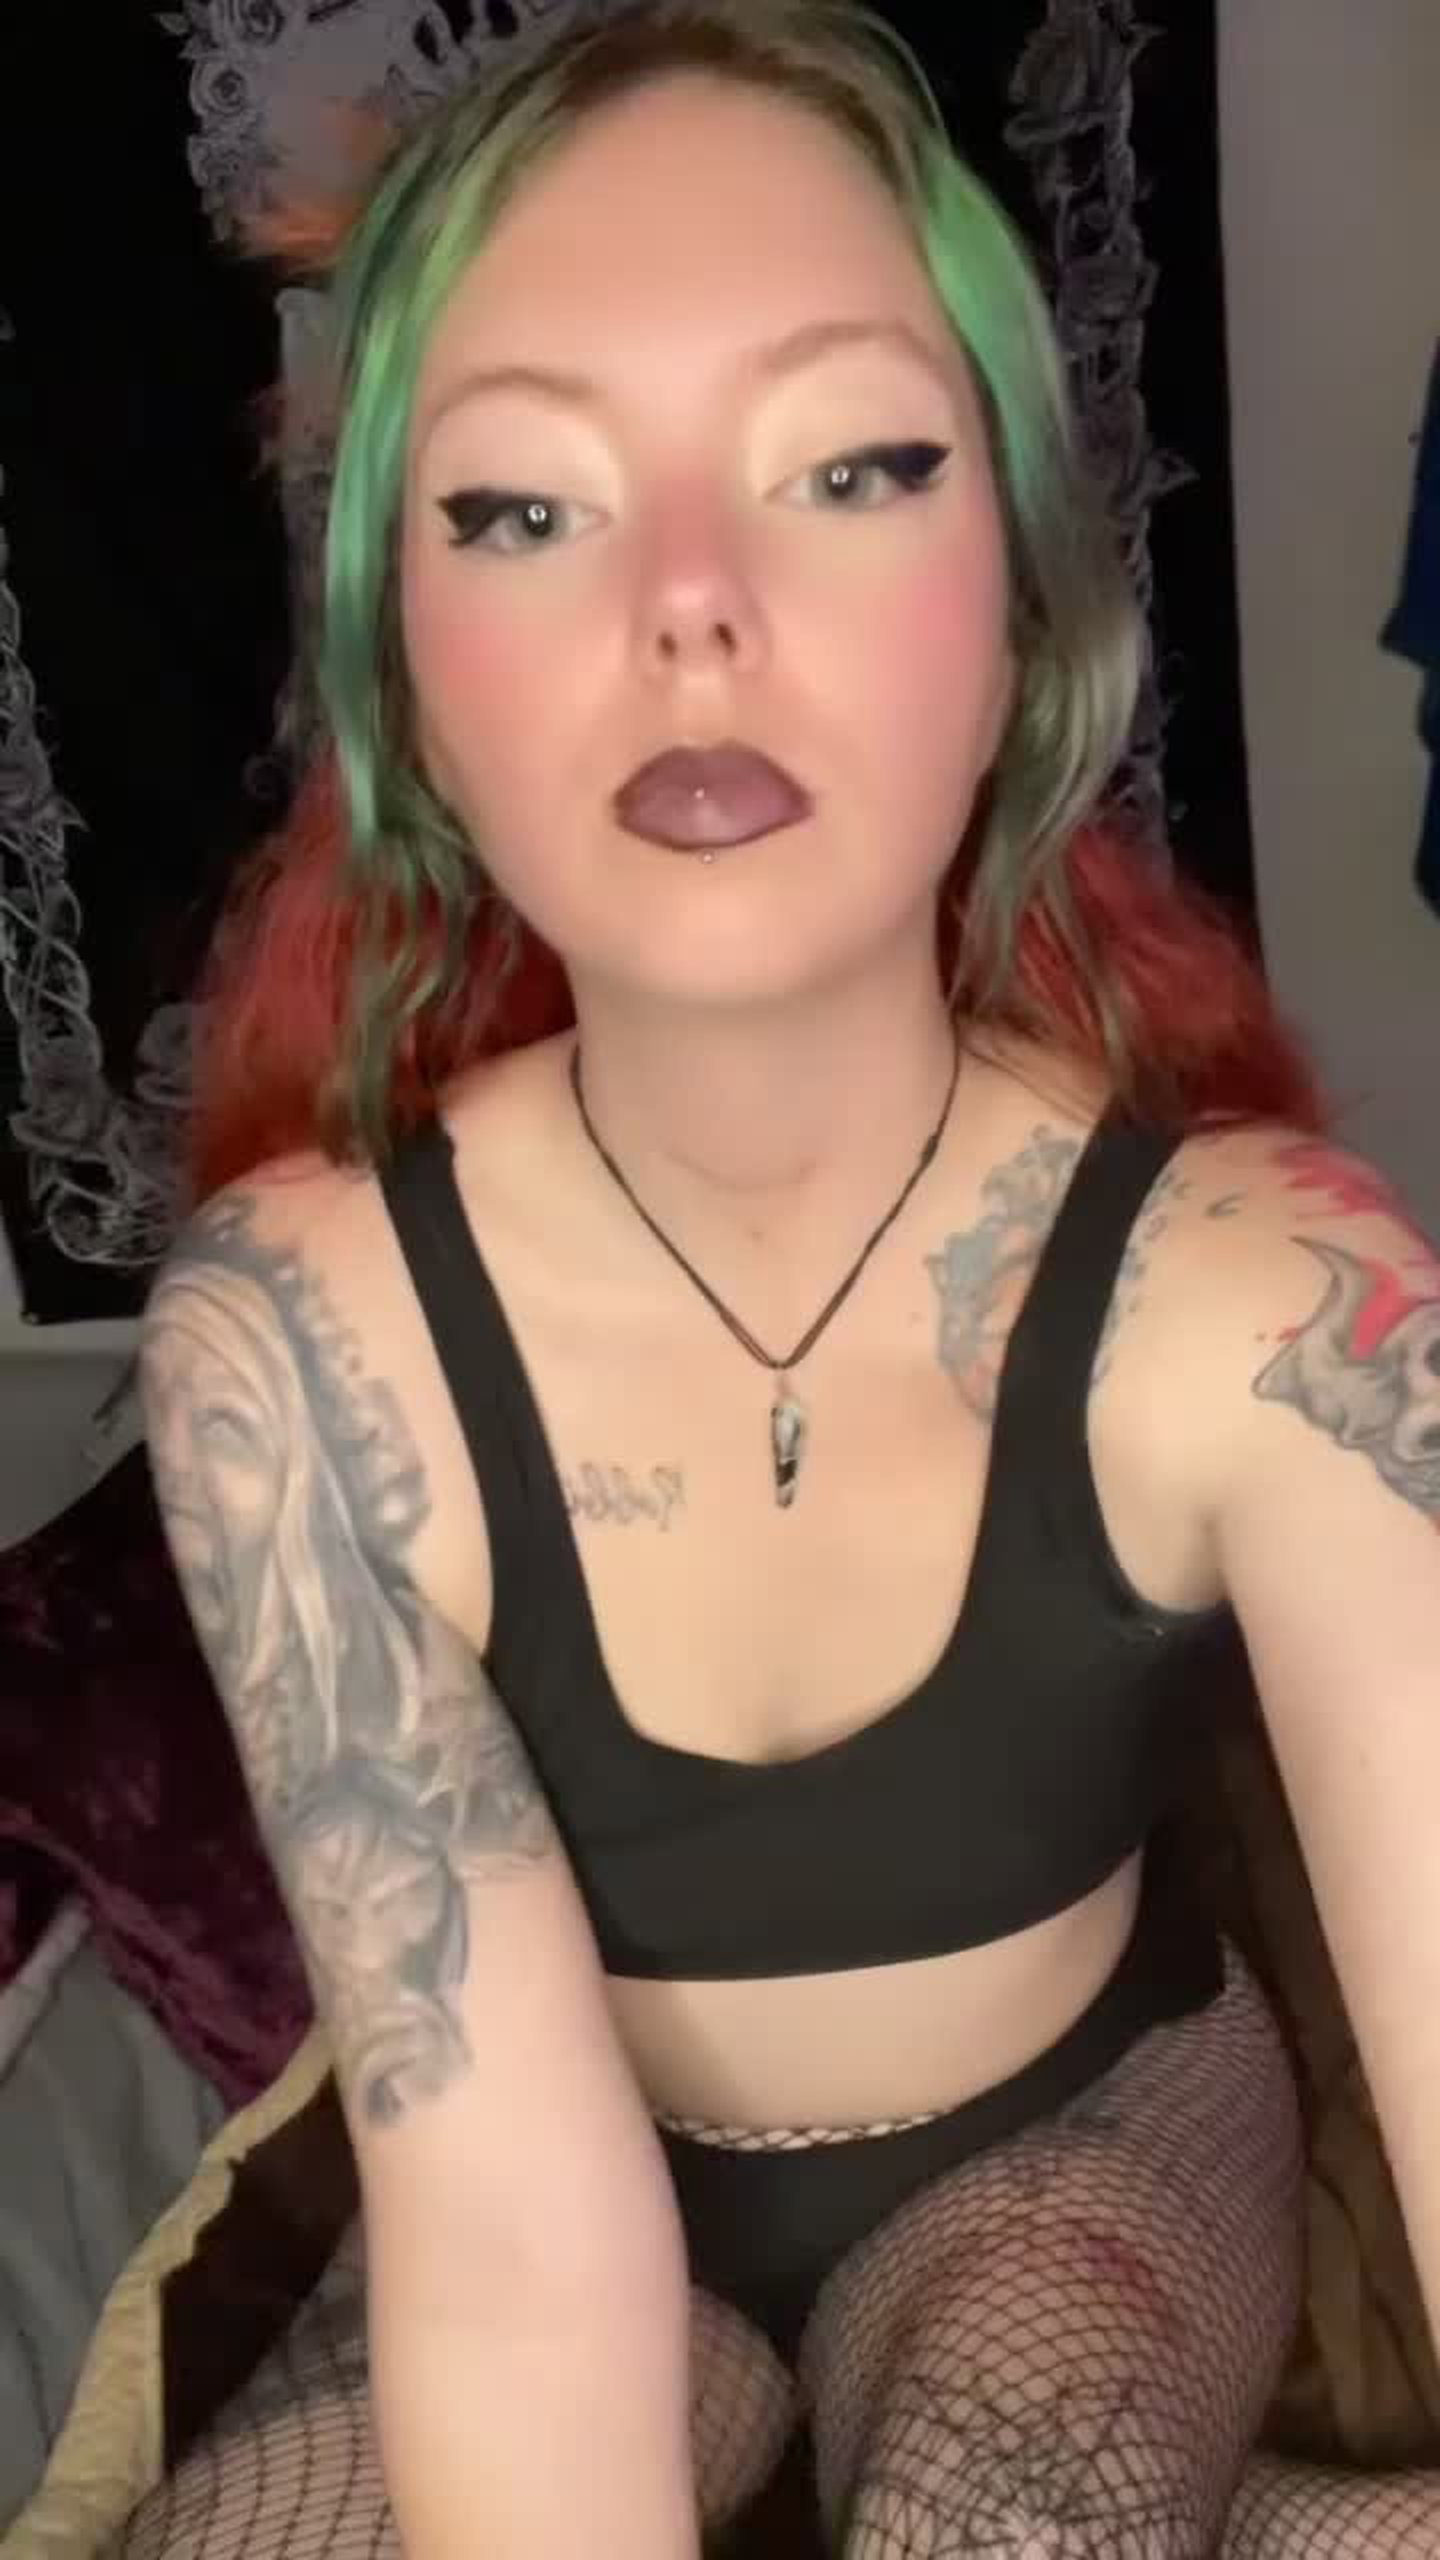 Video post by Spooky666babe